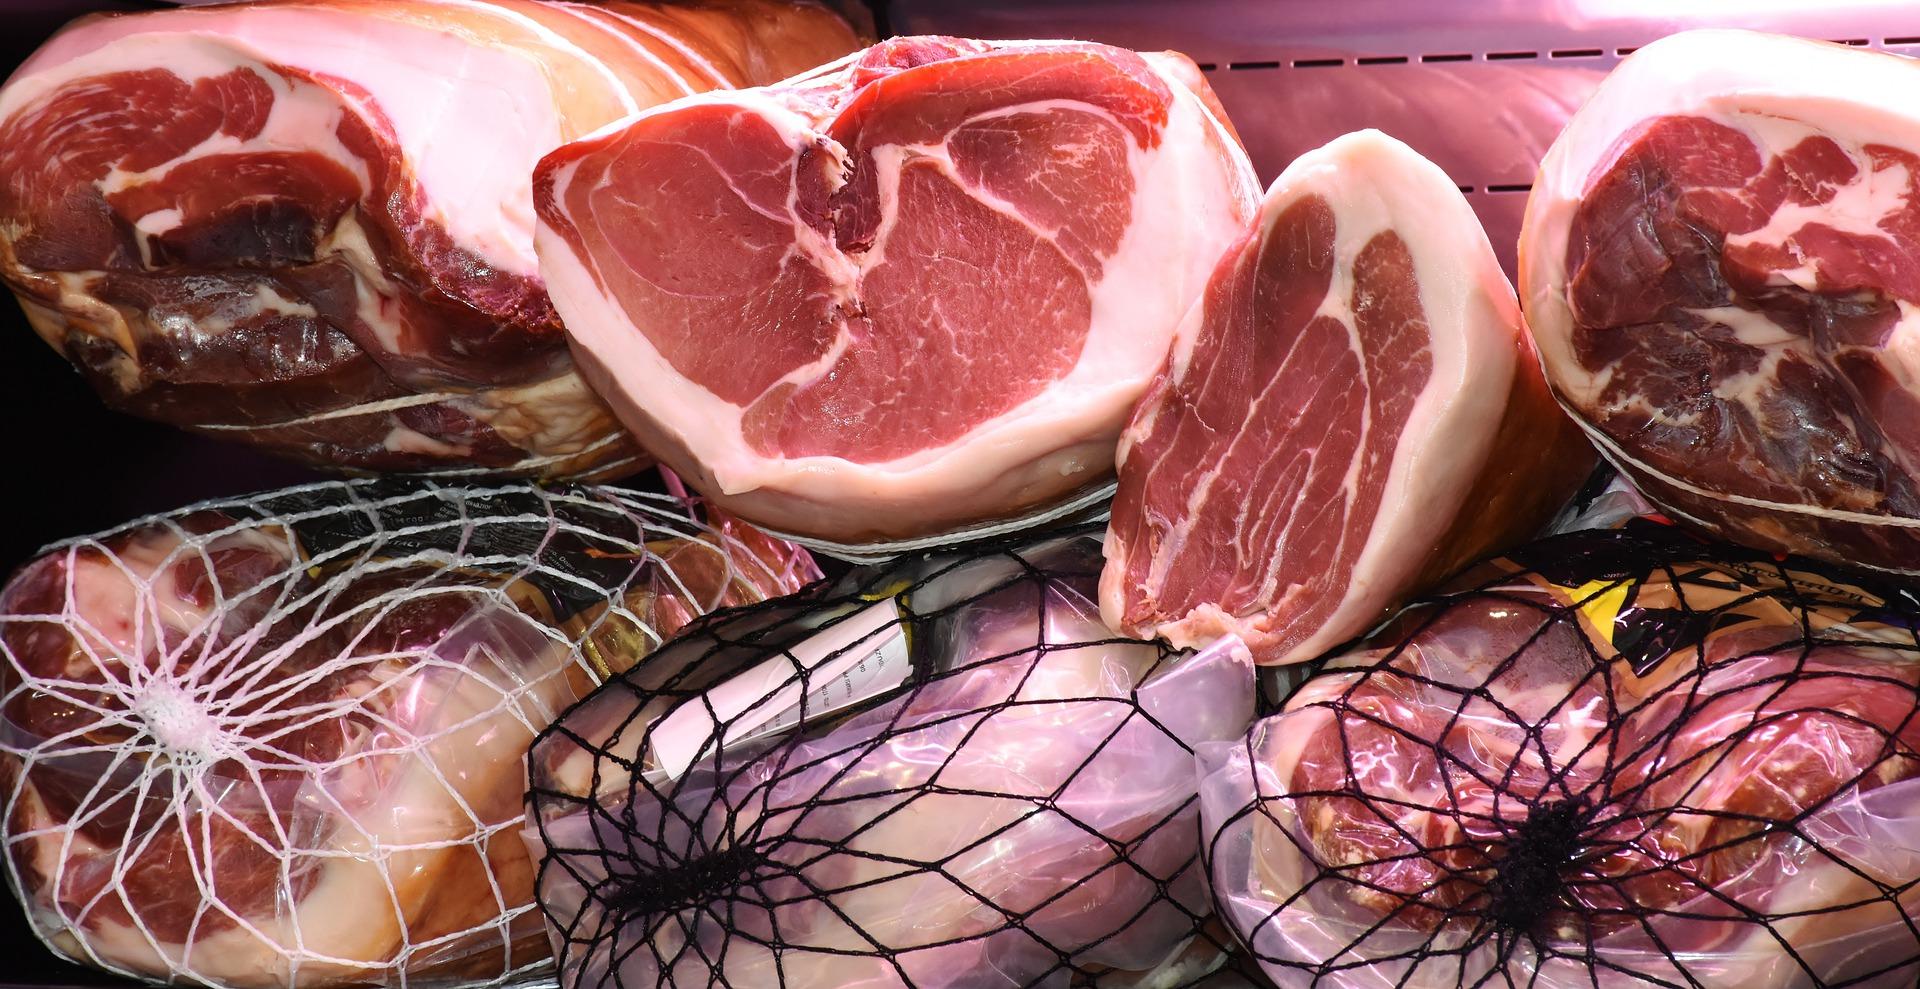 Meat and poultry wholesaler goes under - business assets up for sale  